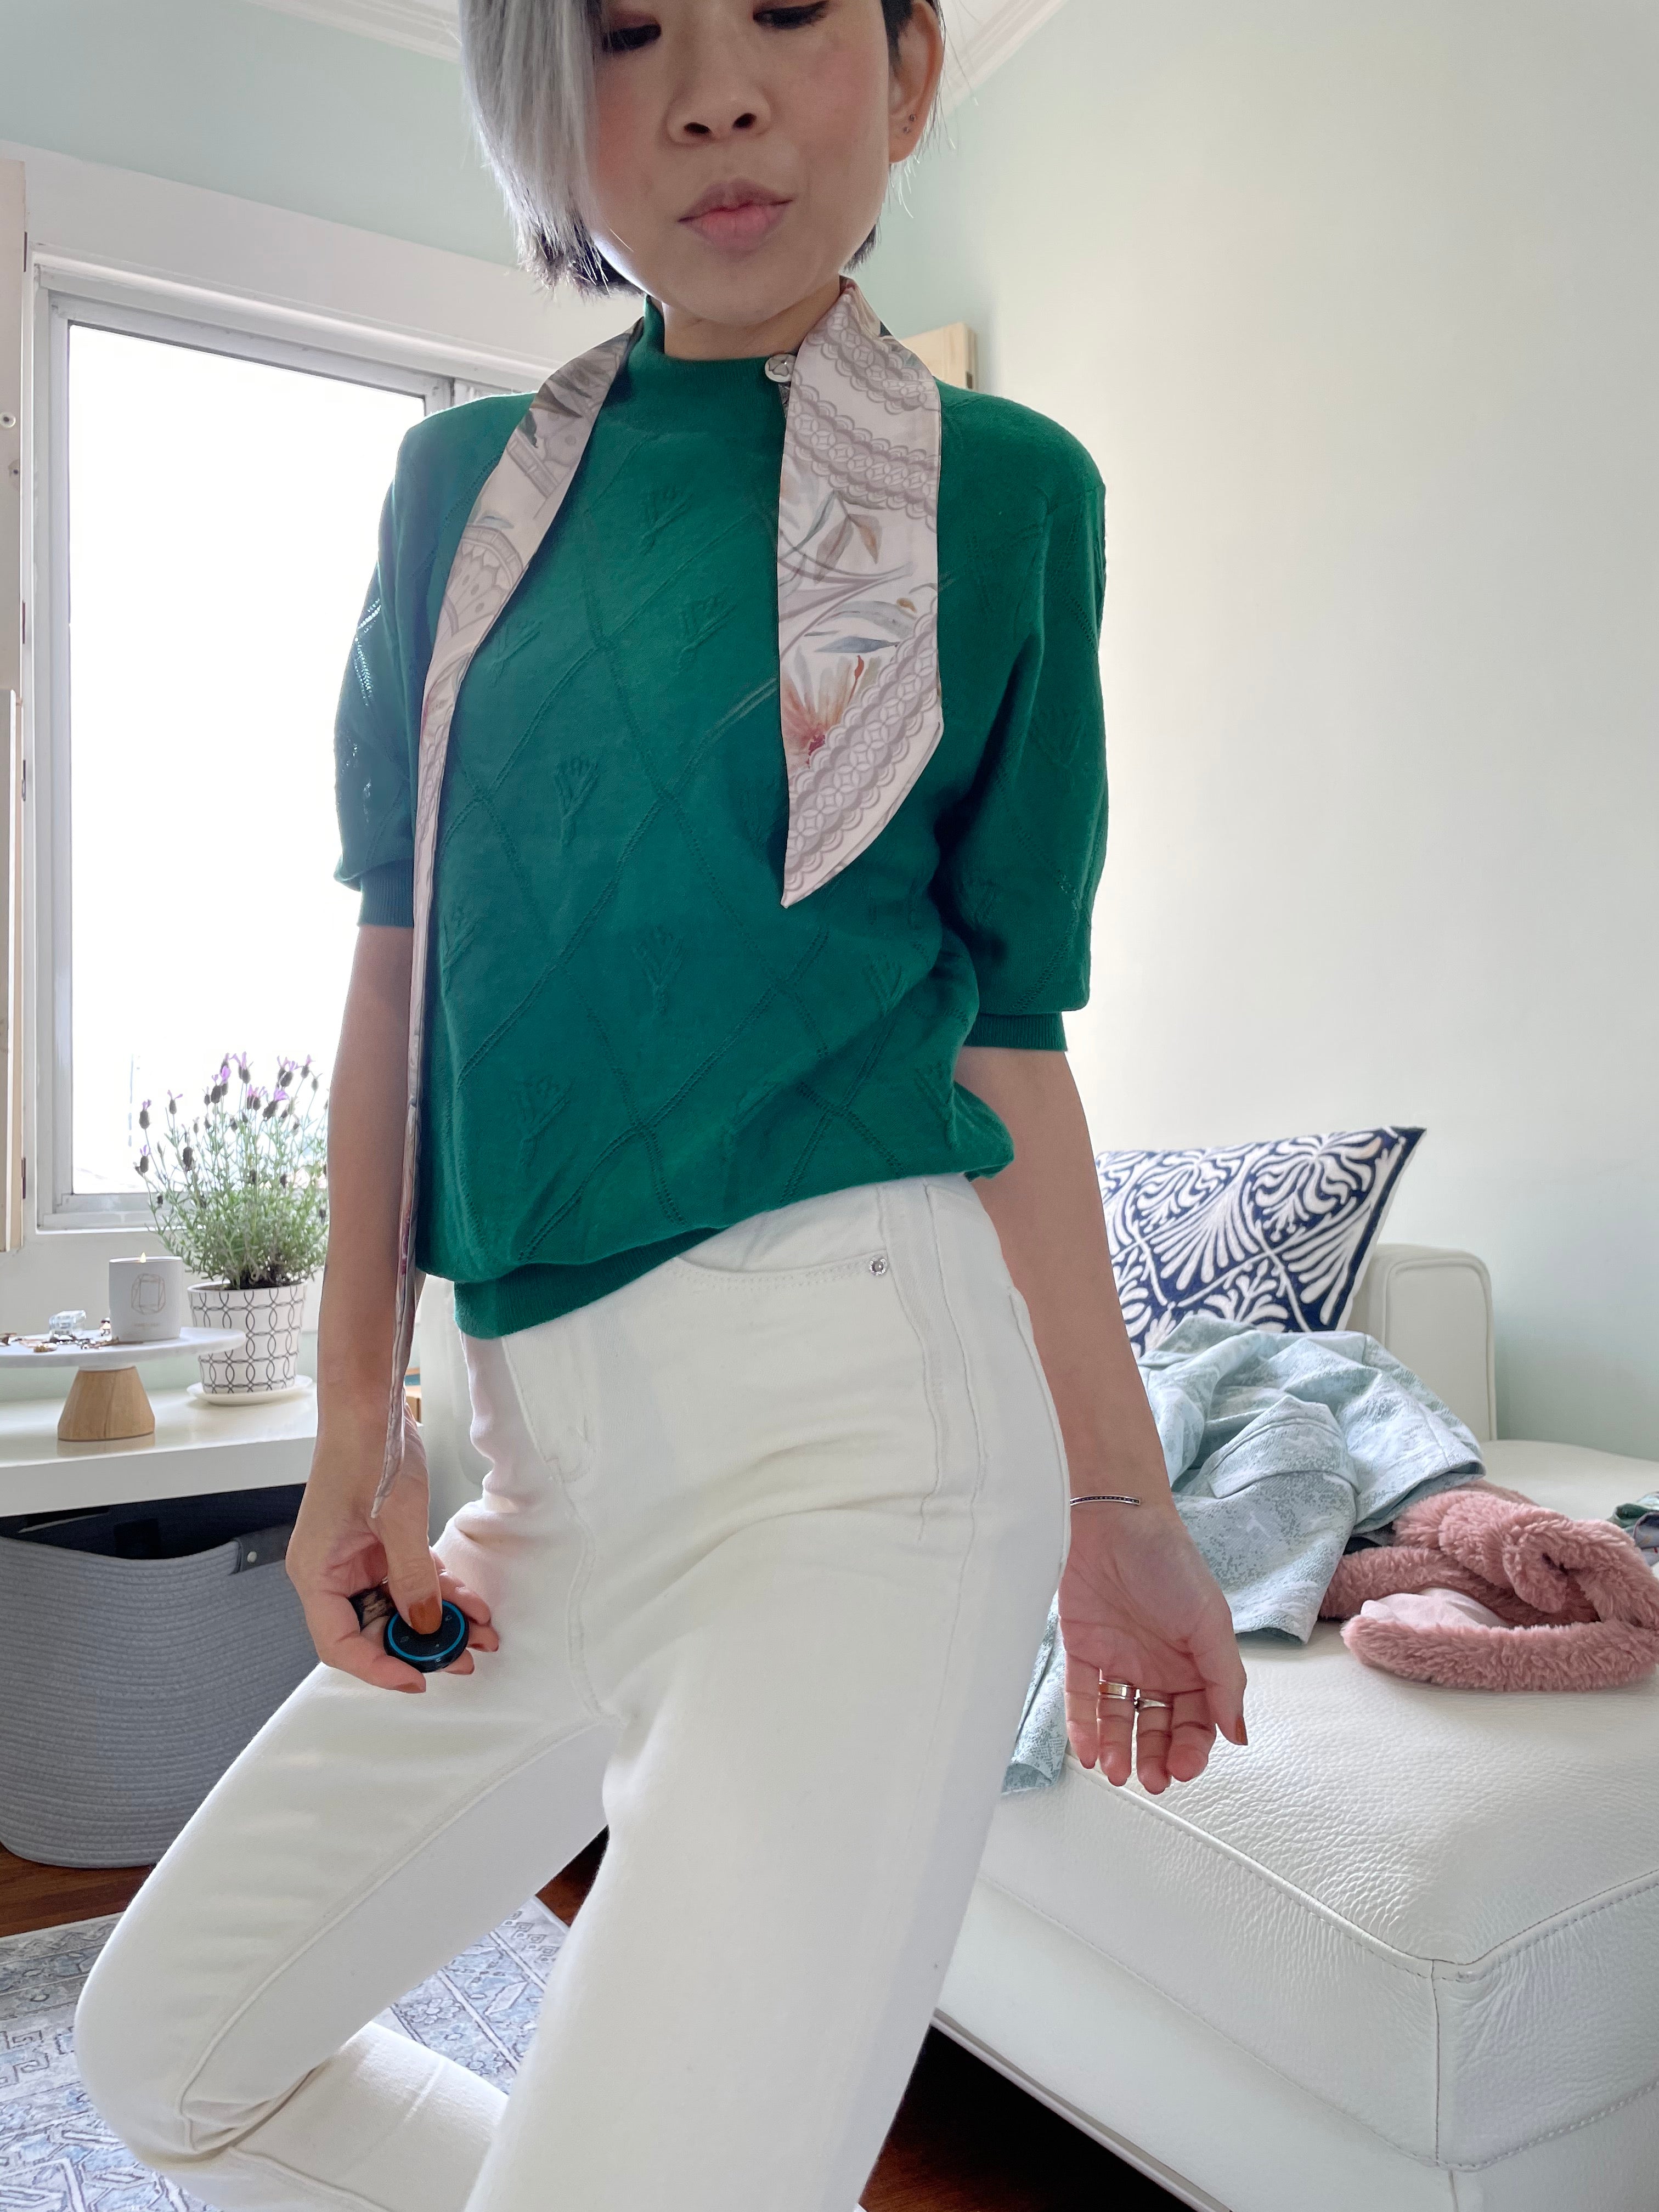 Jacquard Knit with Button Detail backing (green) 590 HKD